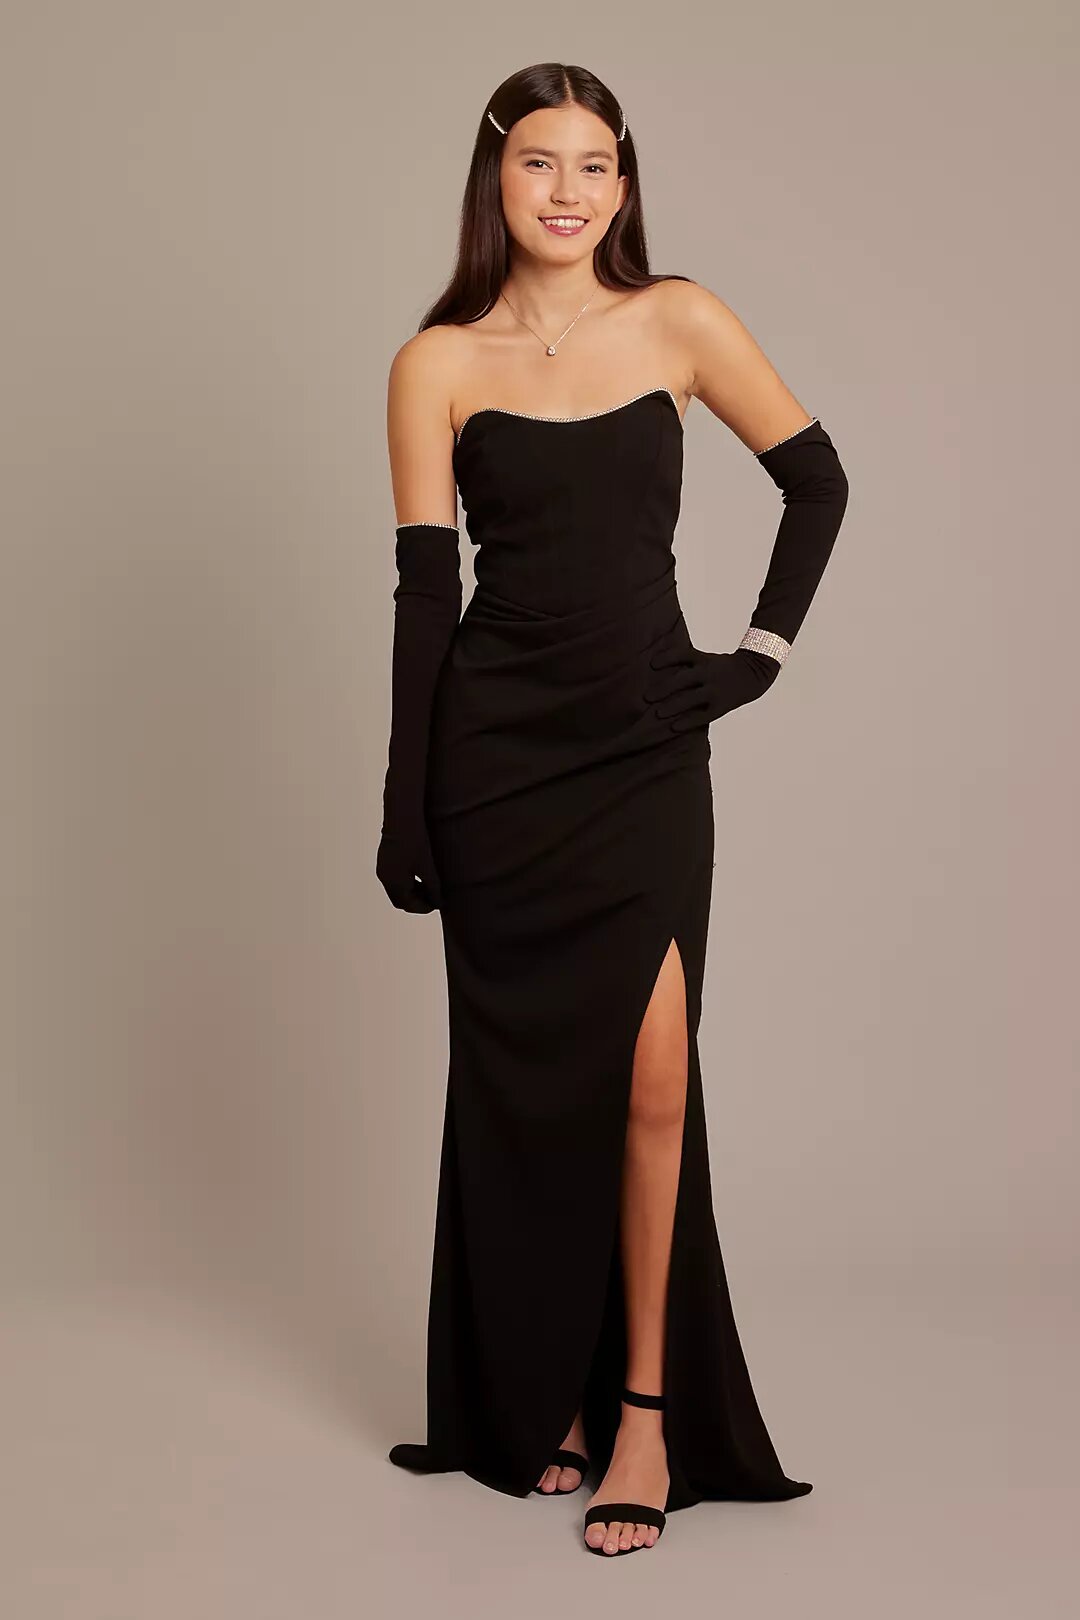 Strapless Draped Crepe Gown with Matching Gloves $120 Shipped